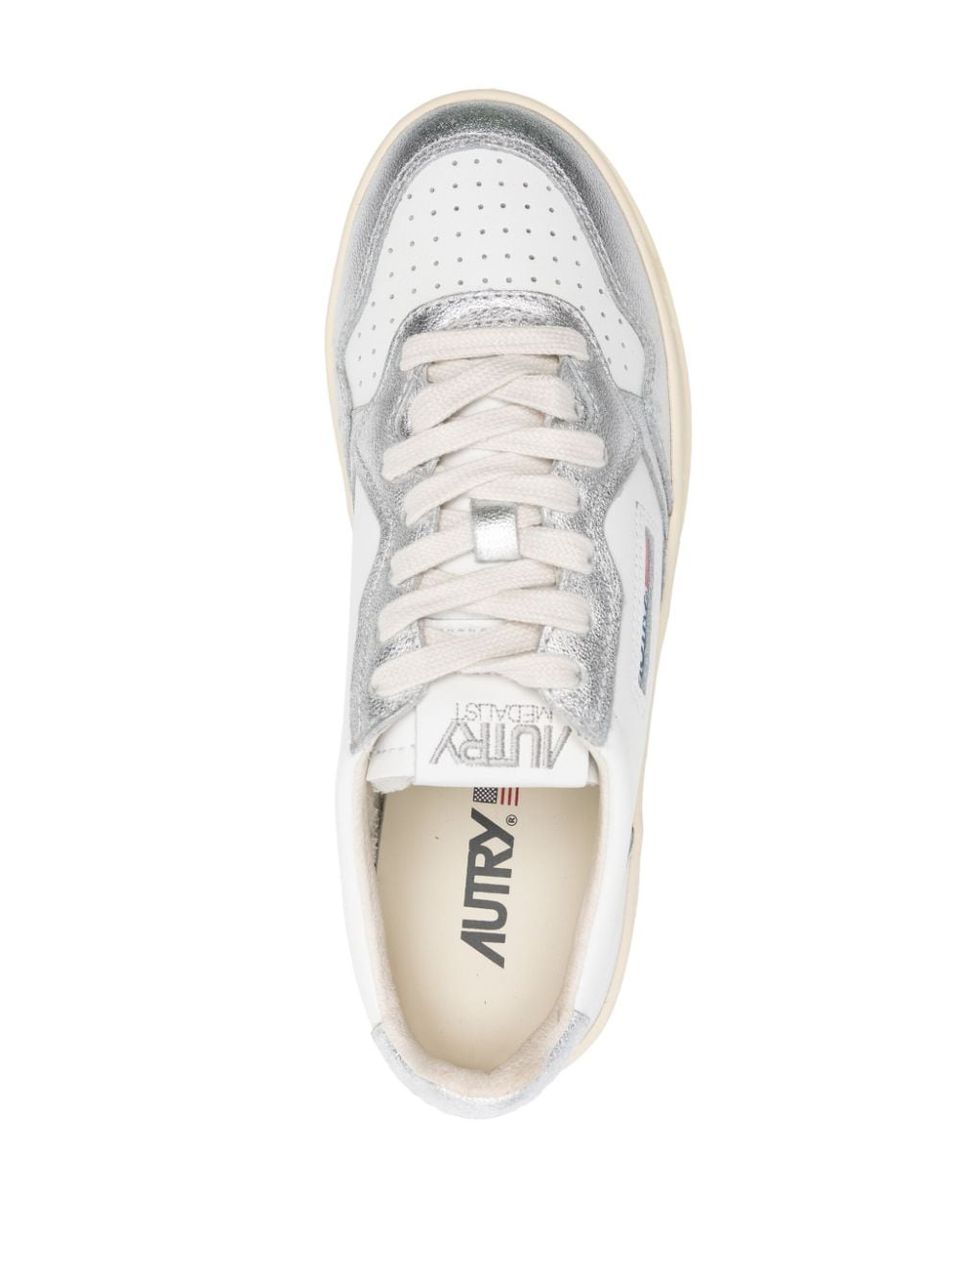 'Medalist' two-tone leather platform sneakers